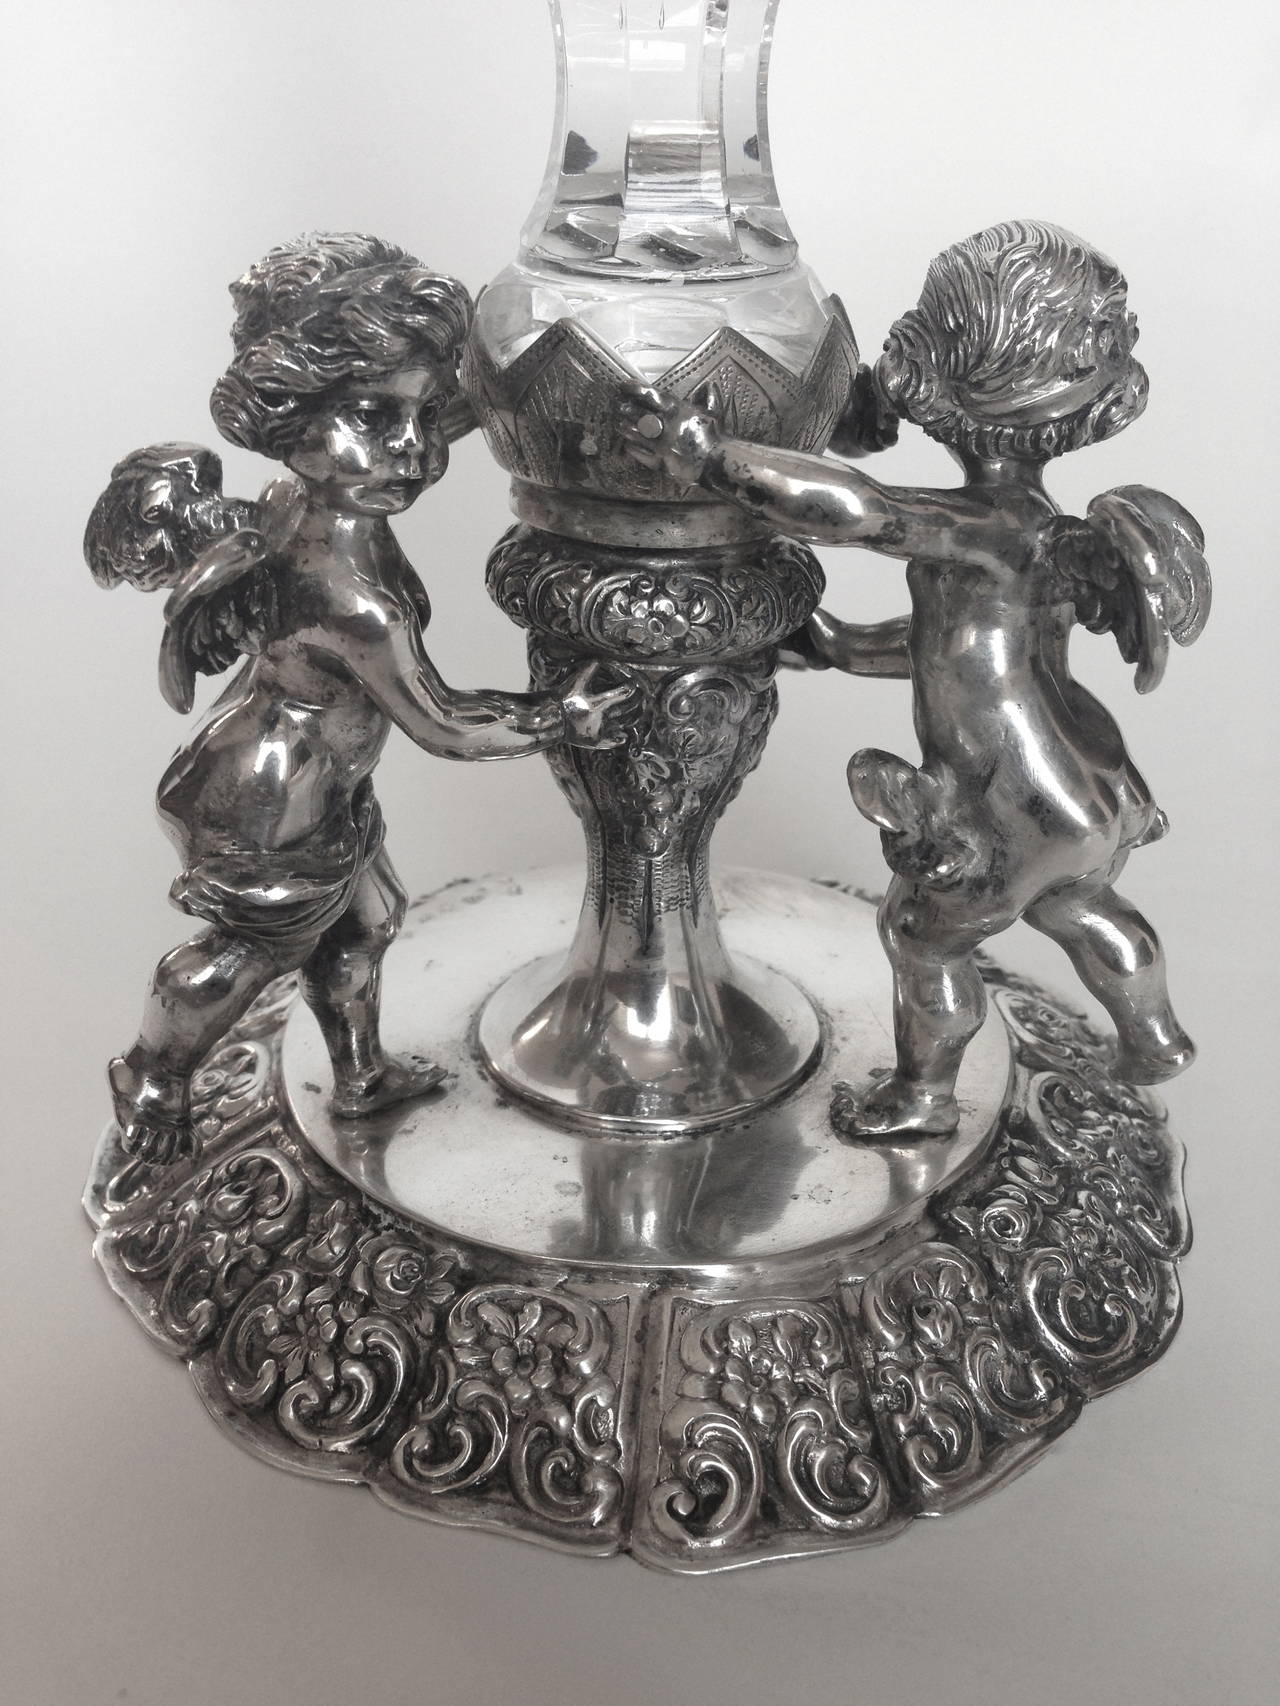 Cast Rare Set of Four German Silver and Crystal Candlesticks, 19th Century